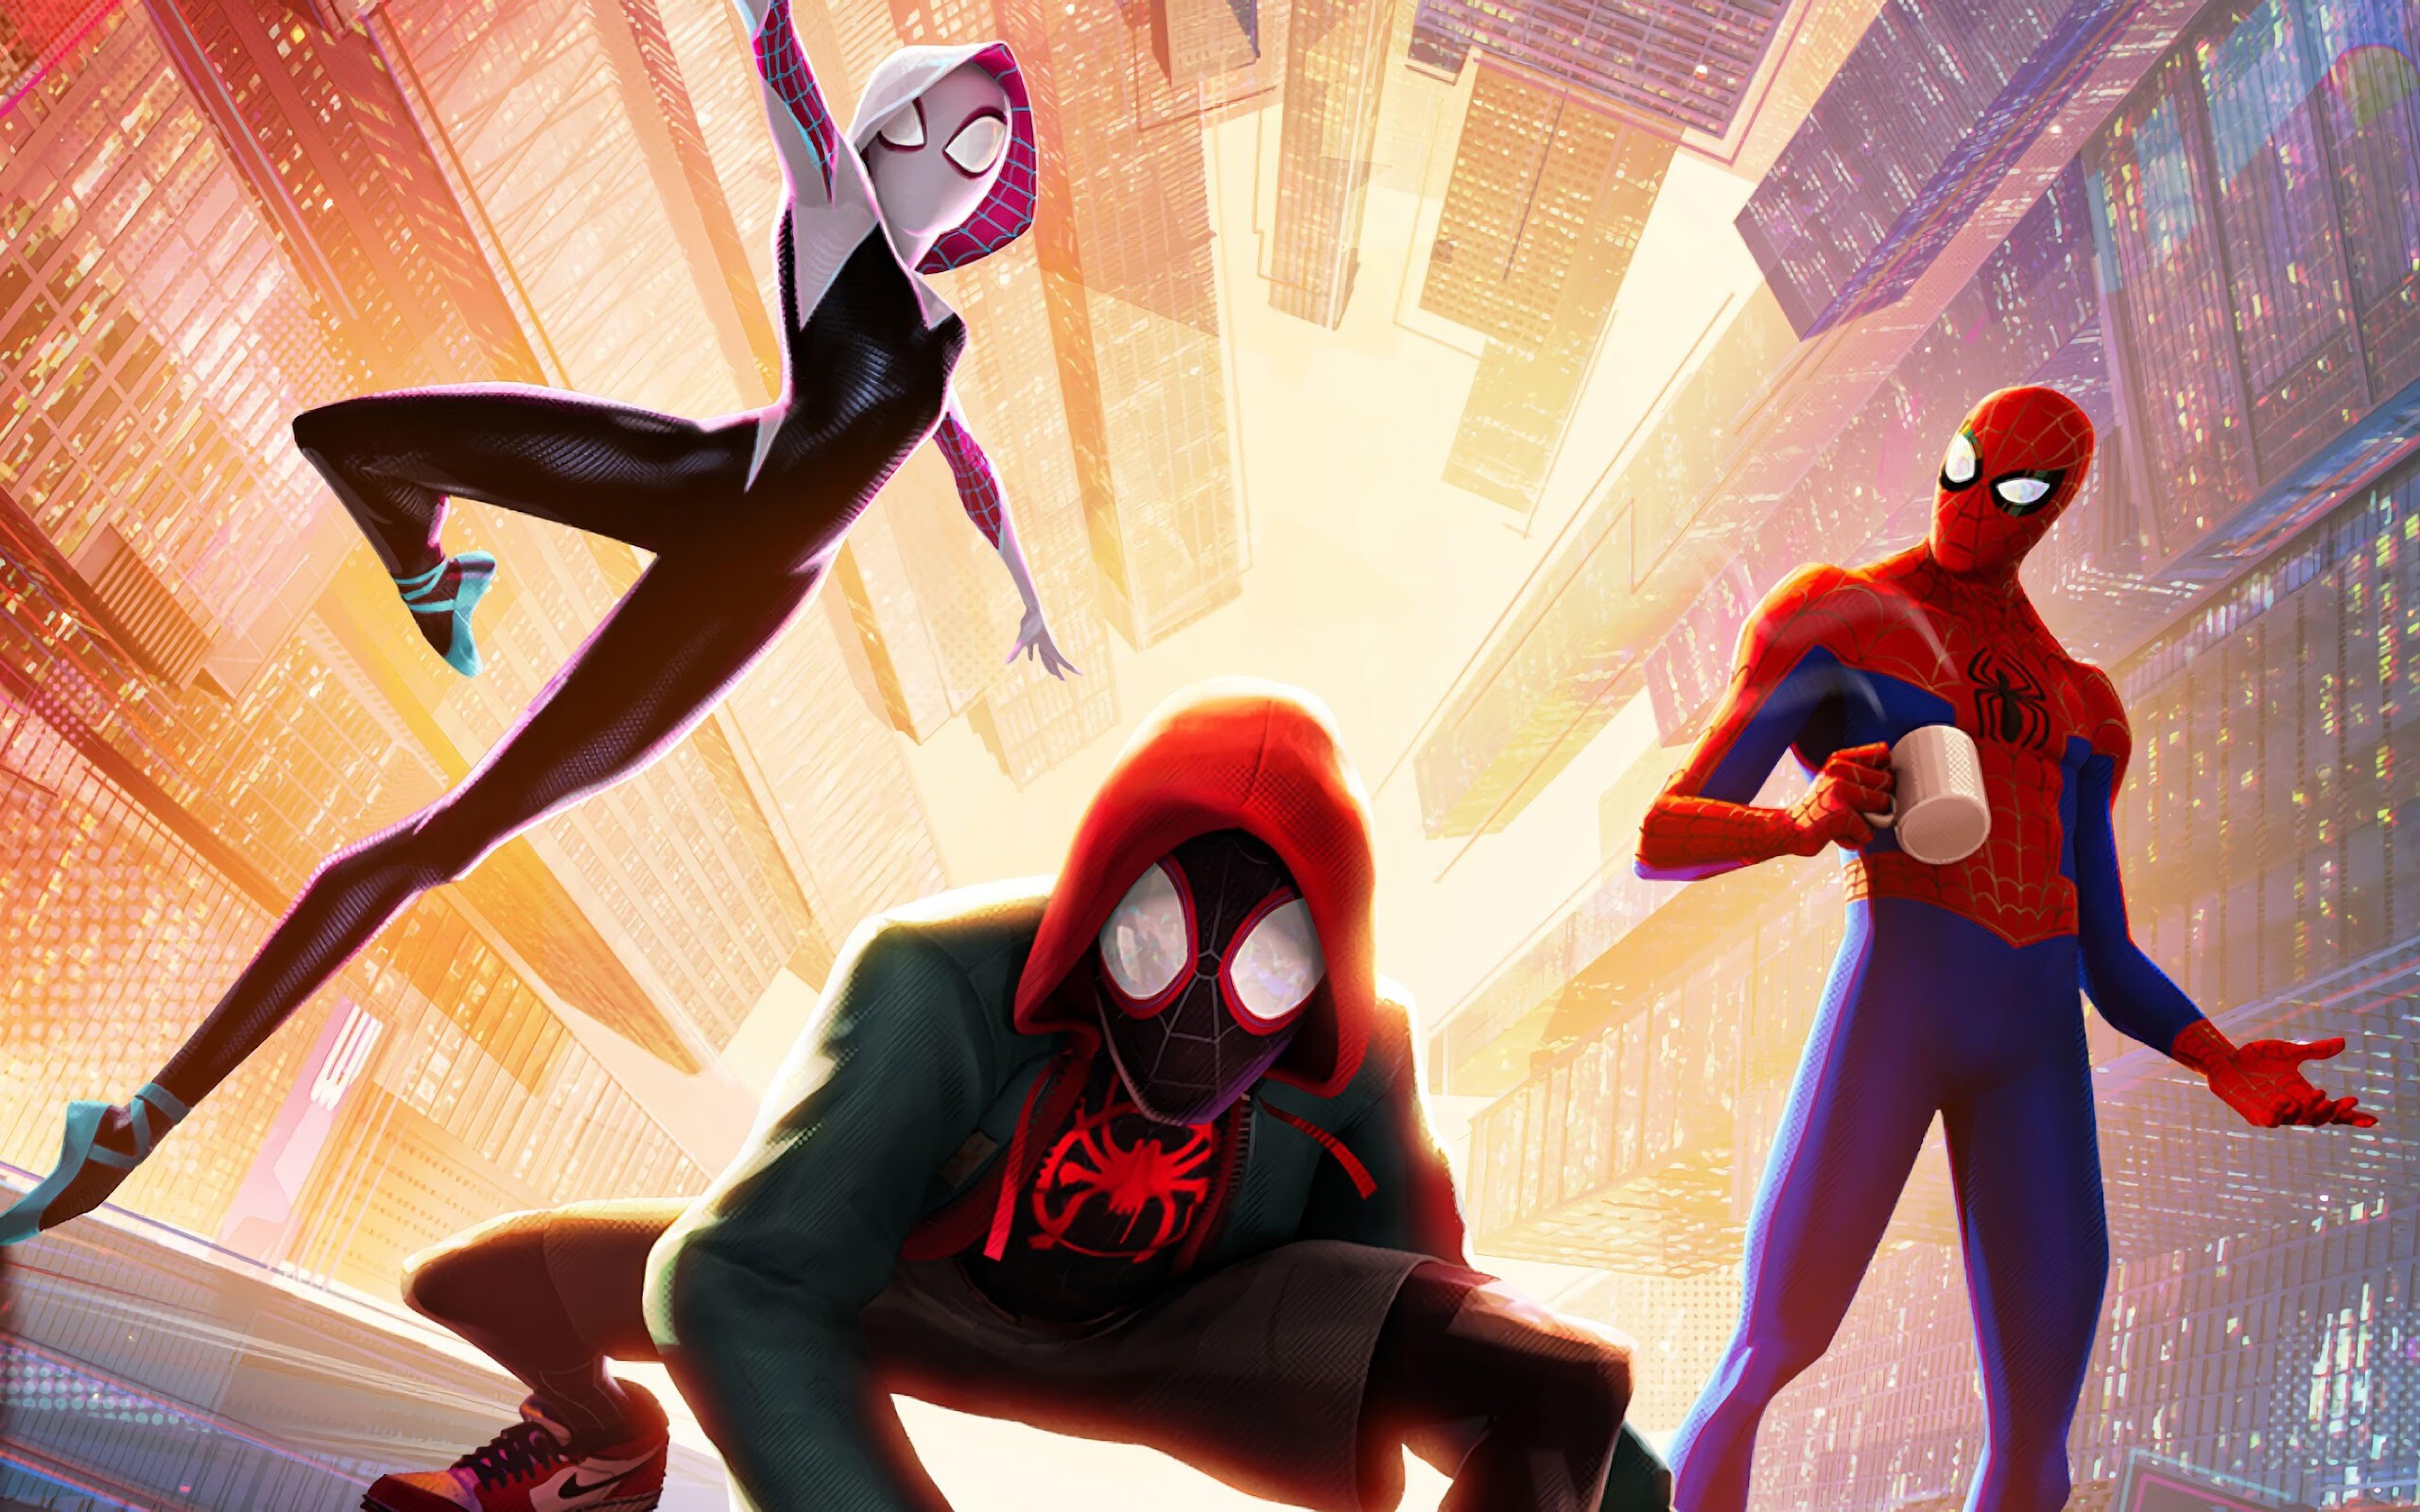 Spider-Man: Into the Spider-Verse: A 2018 superhero animated film based on the Marvel comic book character Miles Morales. 2560x1600 HD Background.